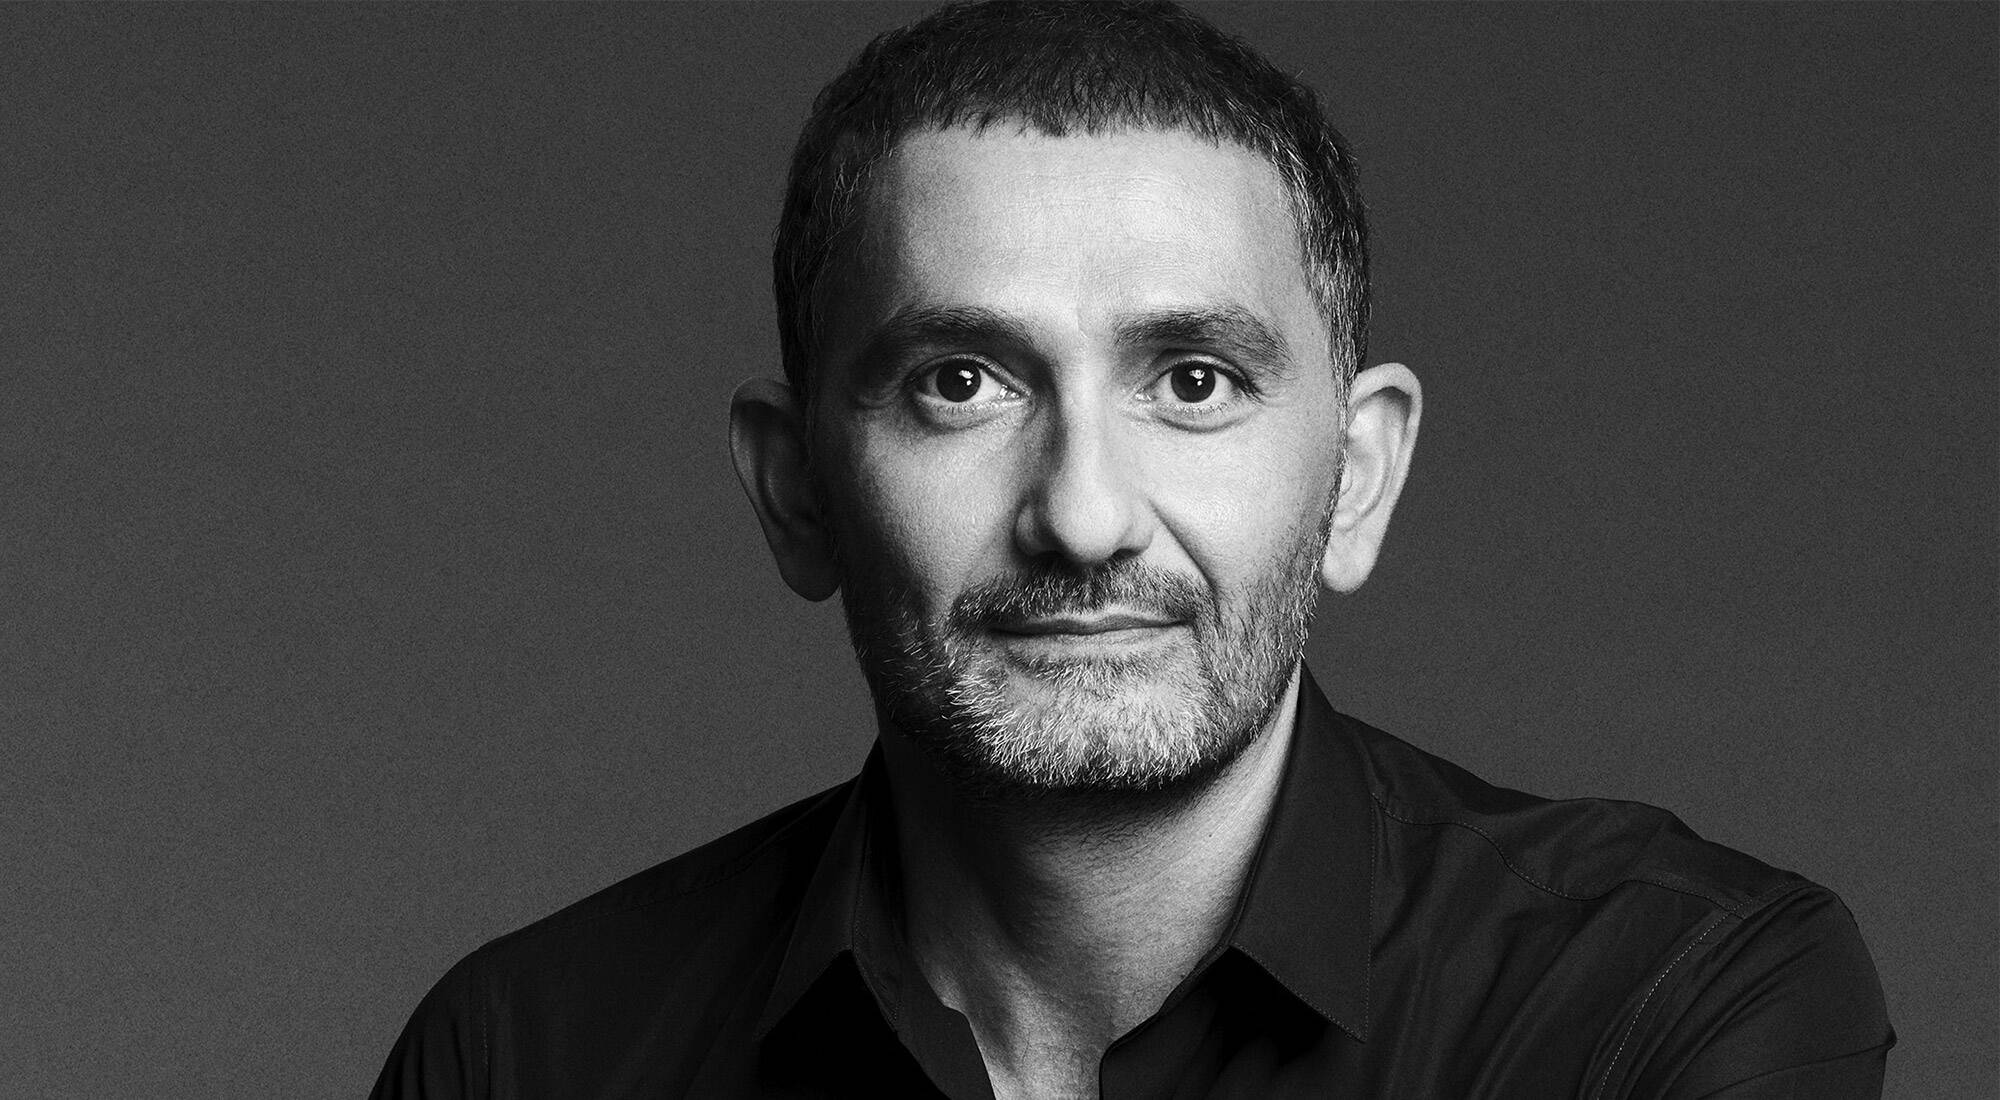 DIOR X MFK // WHAT TO EXPECT WITH FRANCIS KURKDJIAN JOINING DIOR